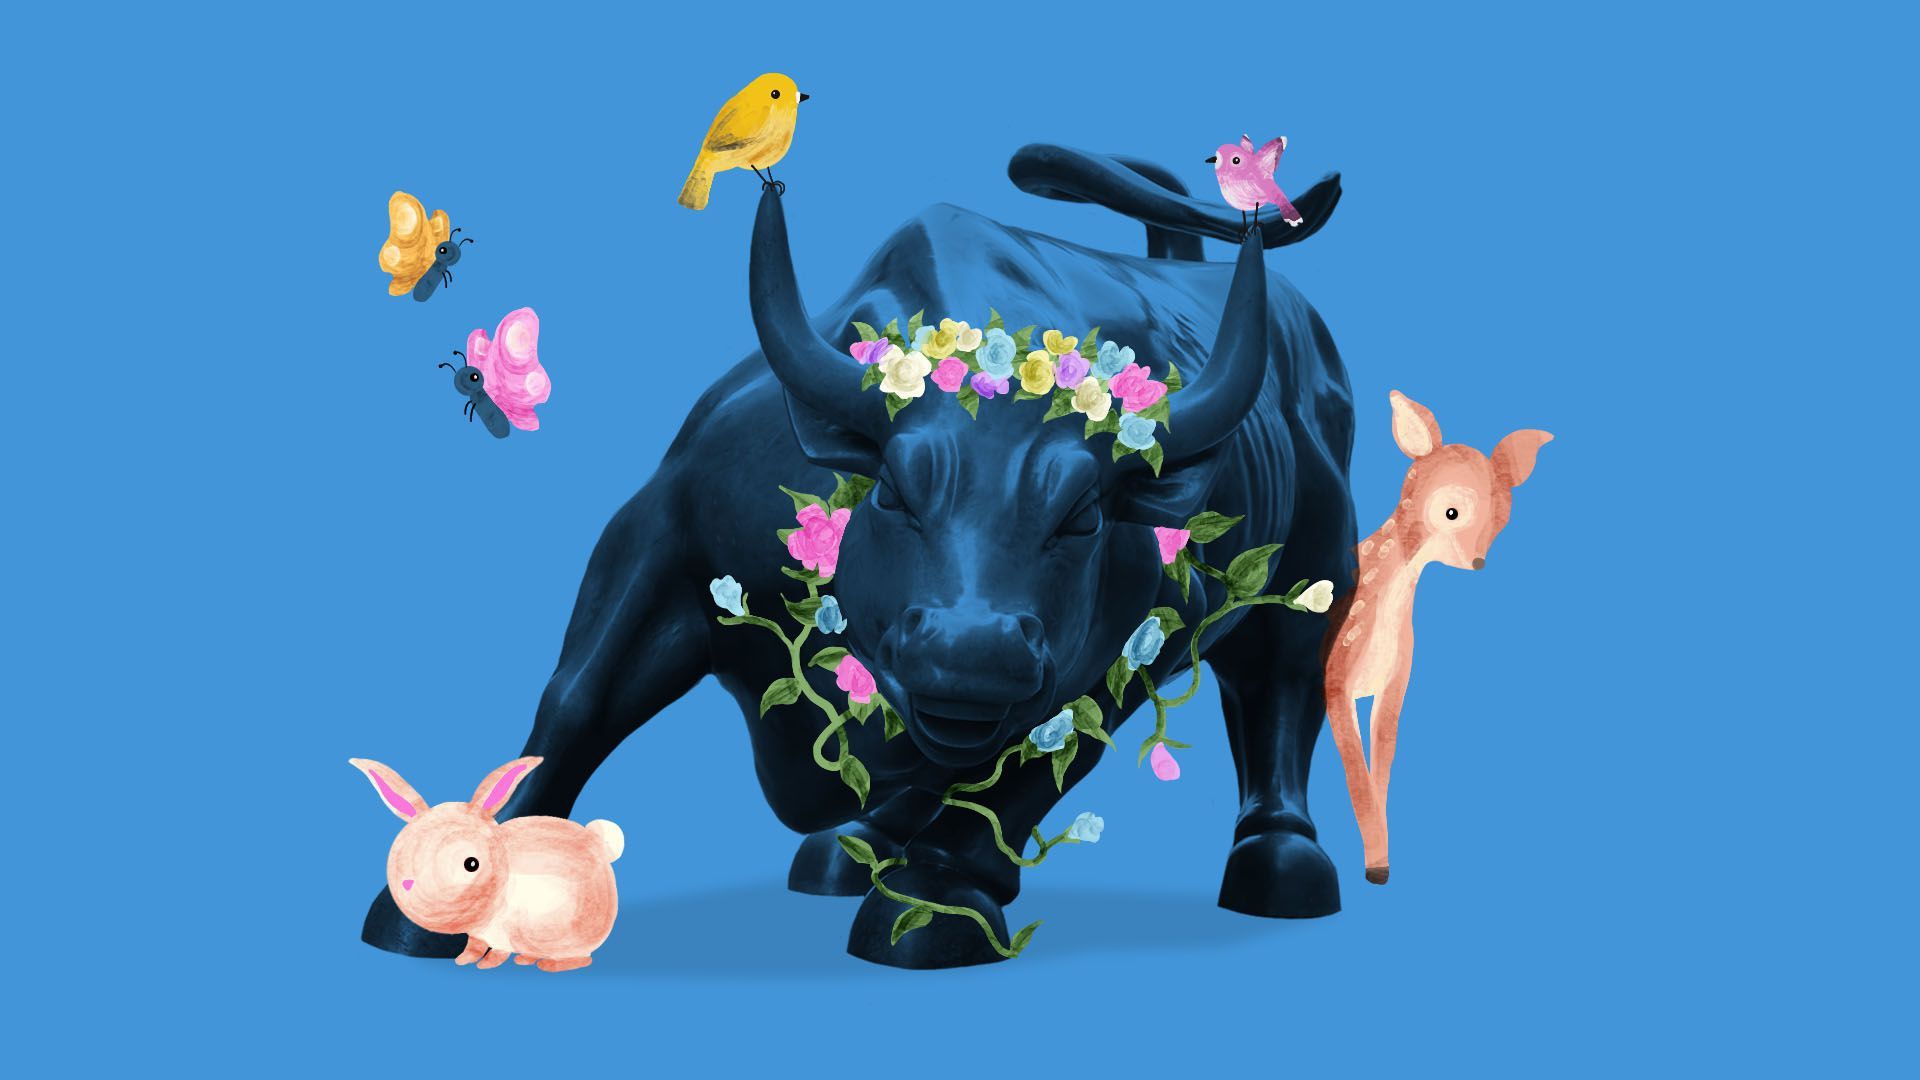 Wall Street Bull surrounded by nature